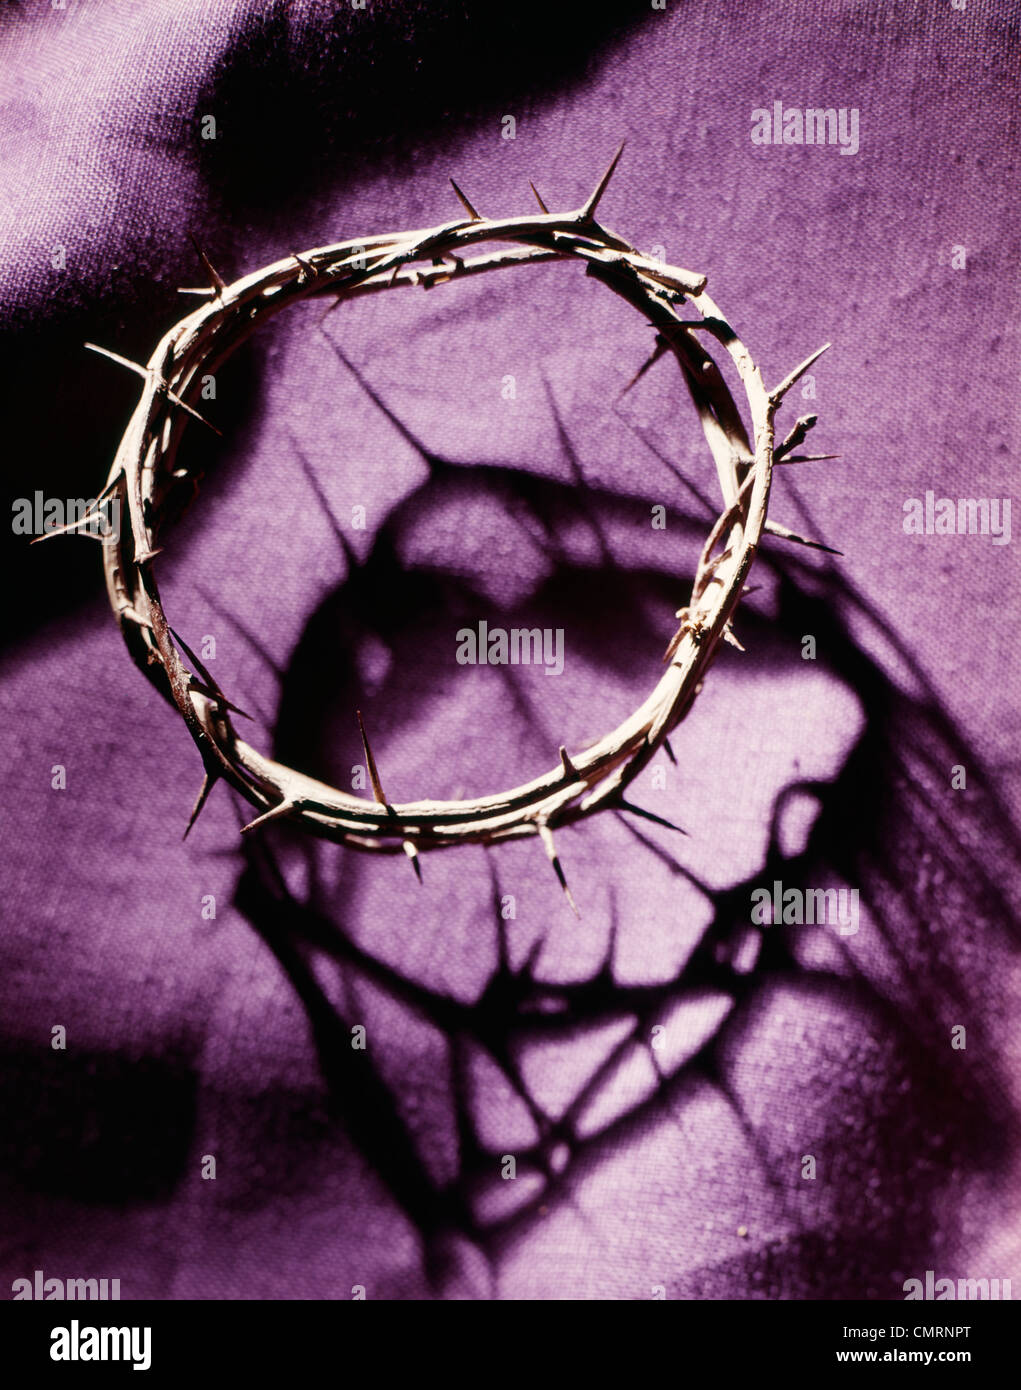 CROWN OF THORNS ON PURPLE CLOTH Stock Photo